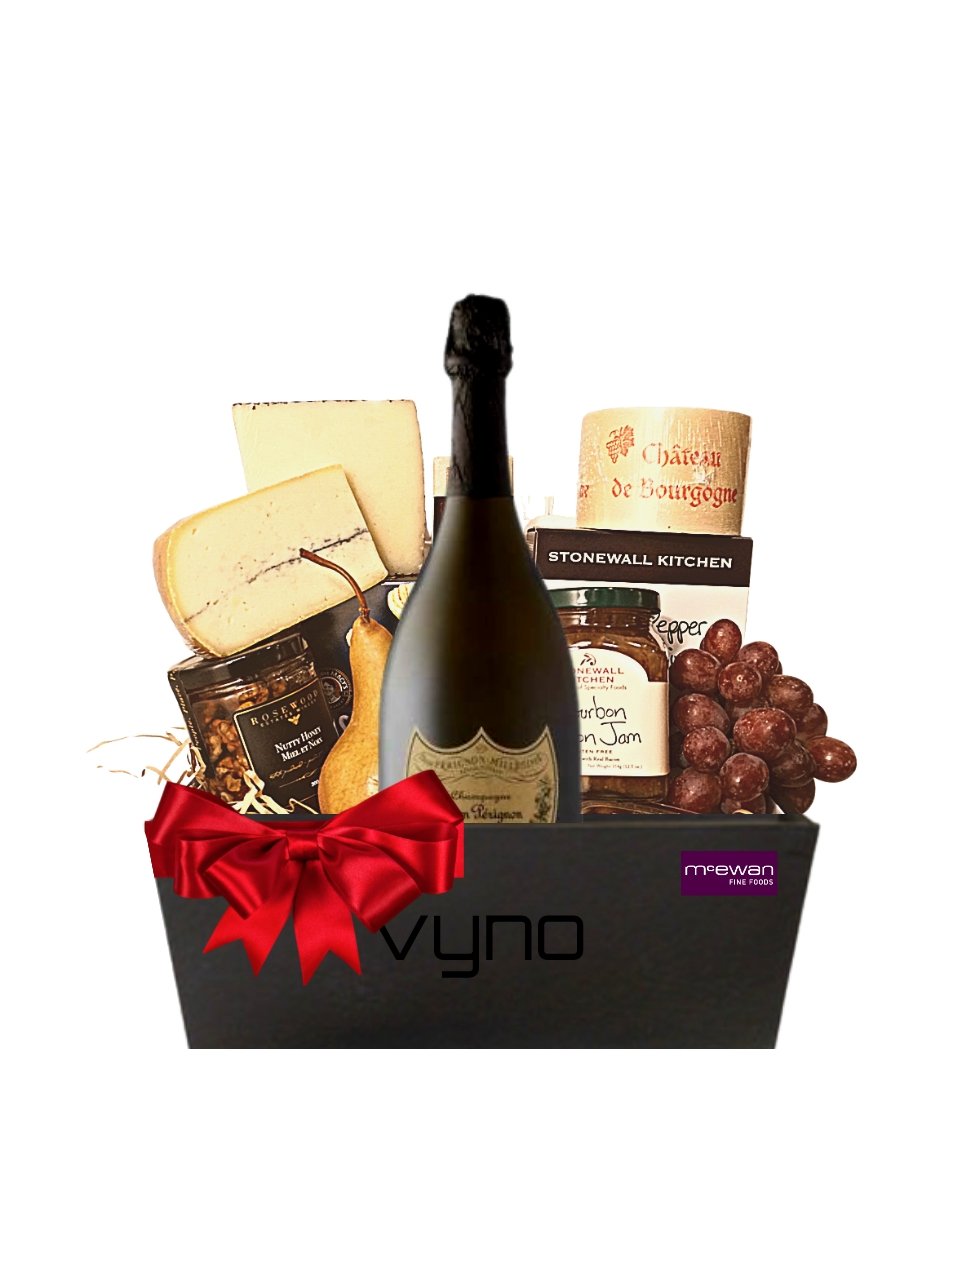 What Kind of Products Make For a Great Gift Basket? - Vyno